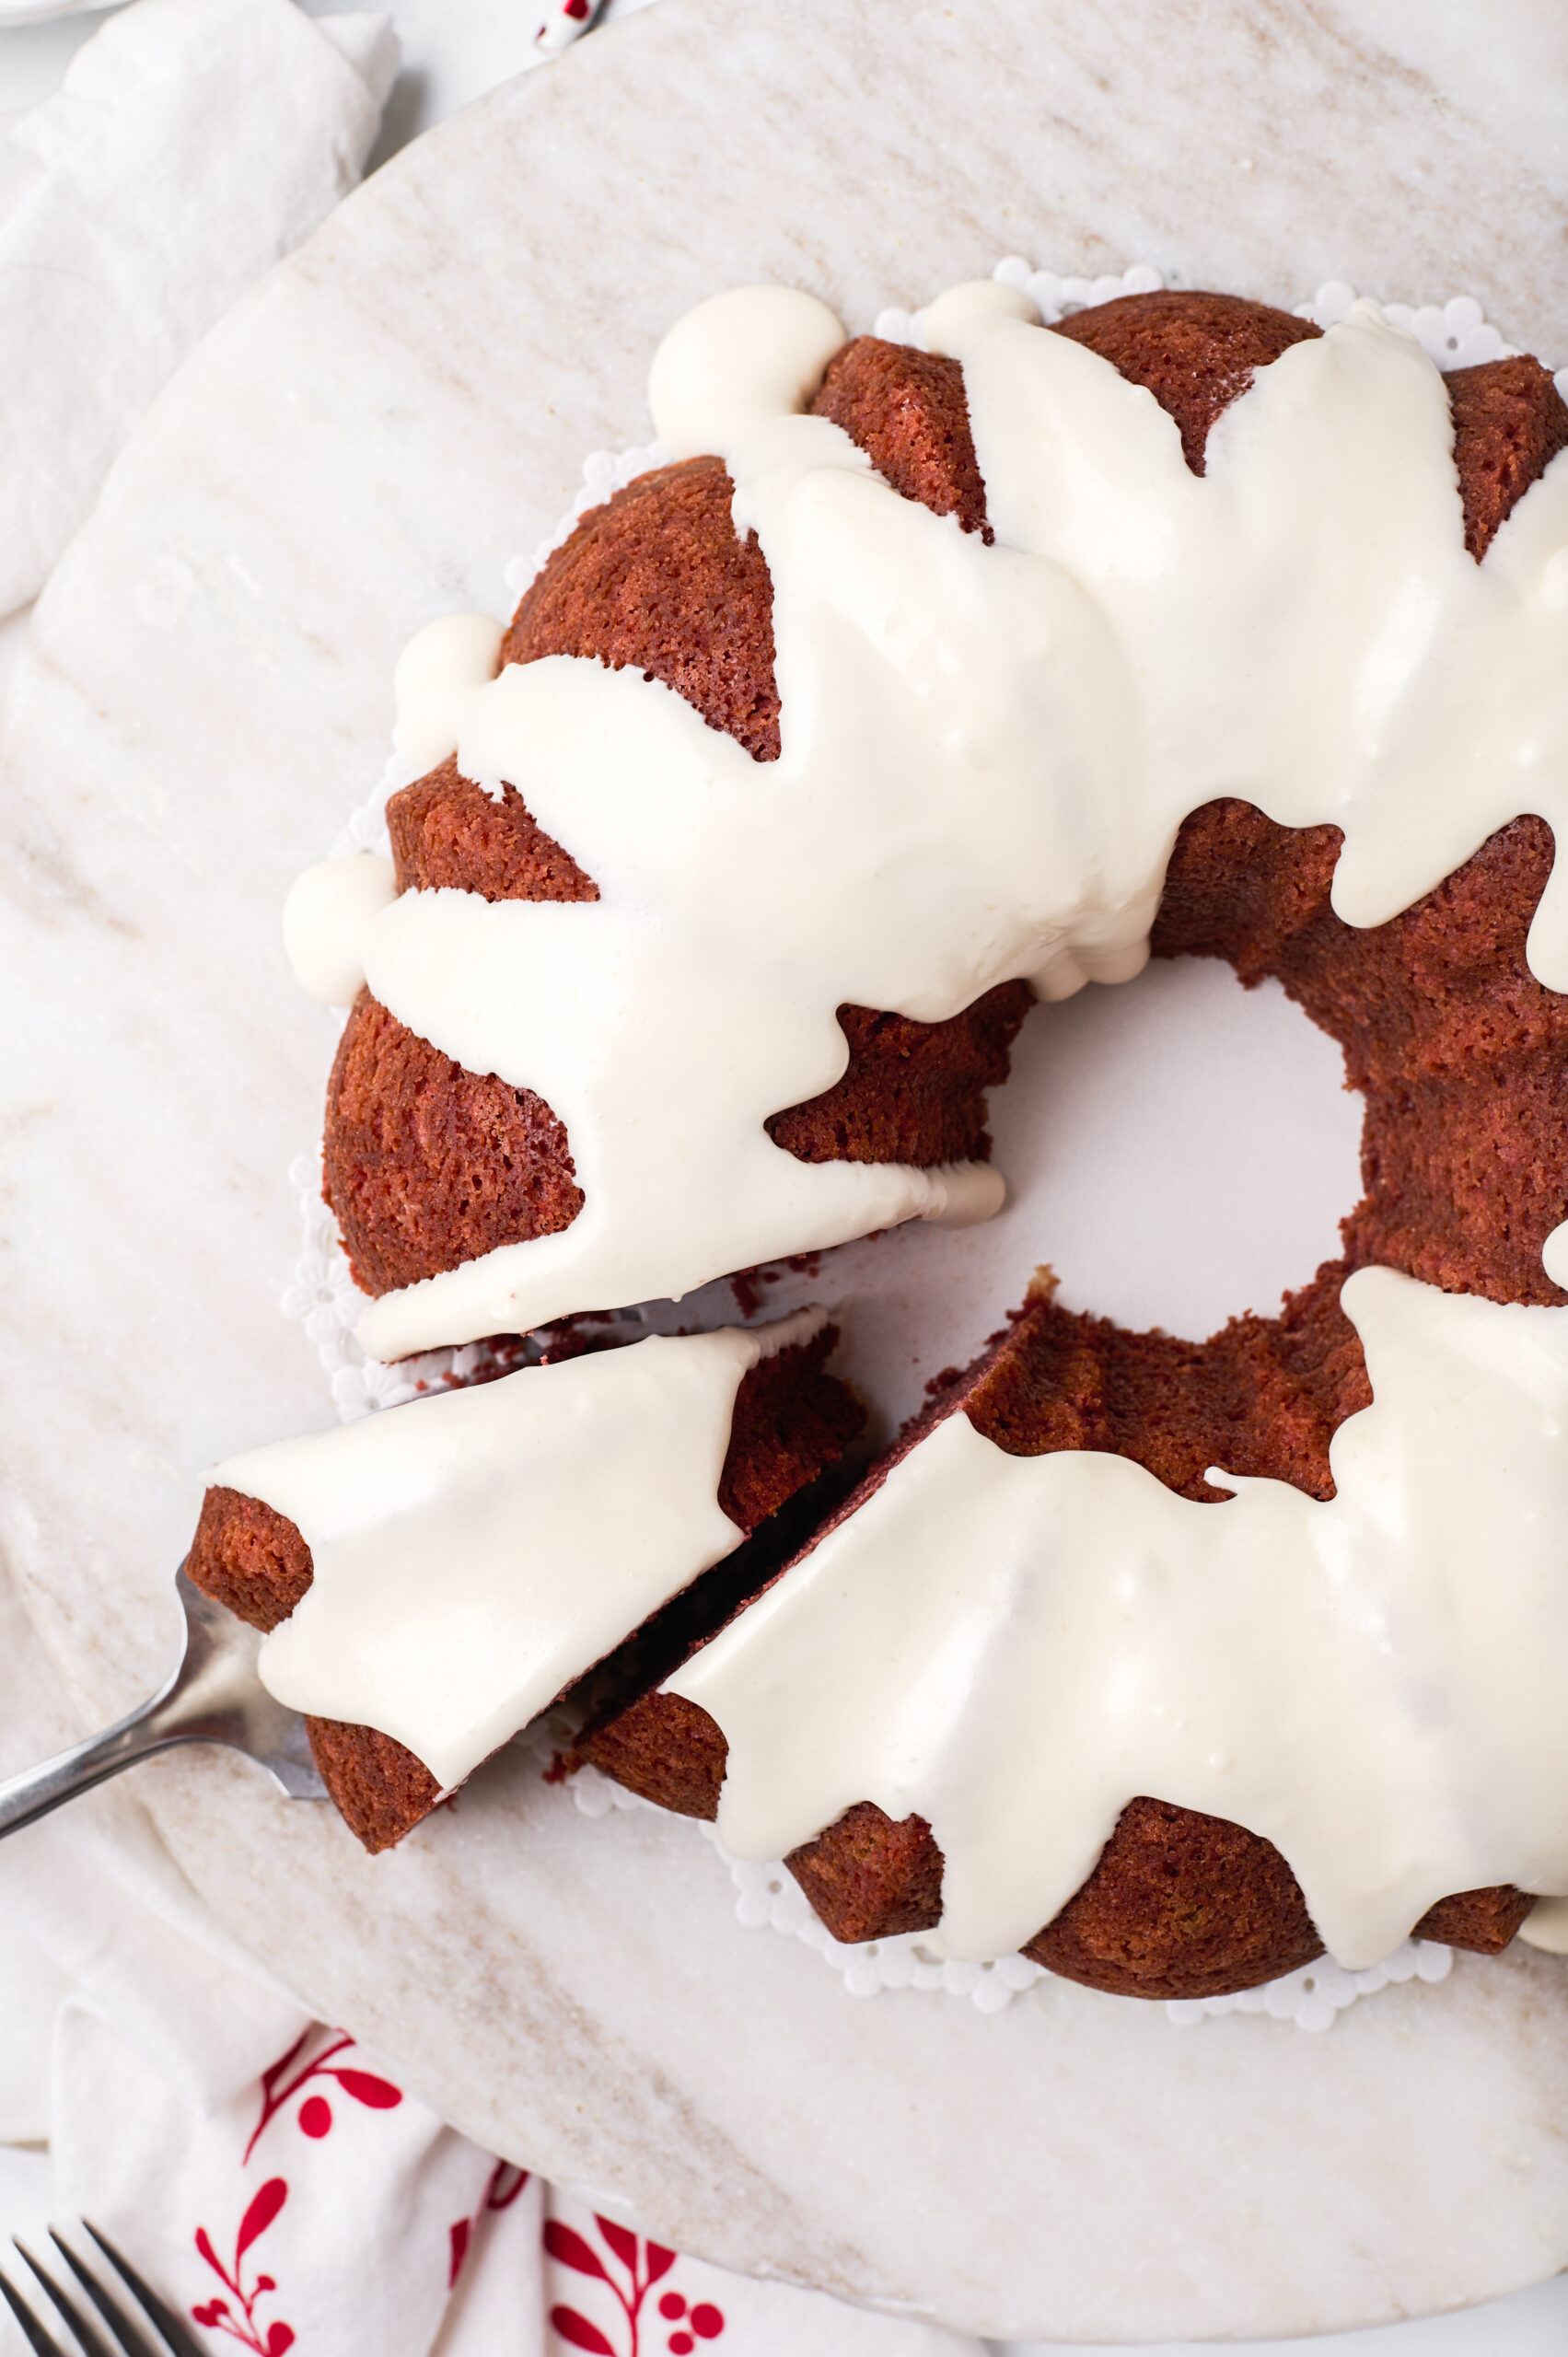 birds eye image of a whole red velvet bundt cake with a slice being removed